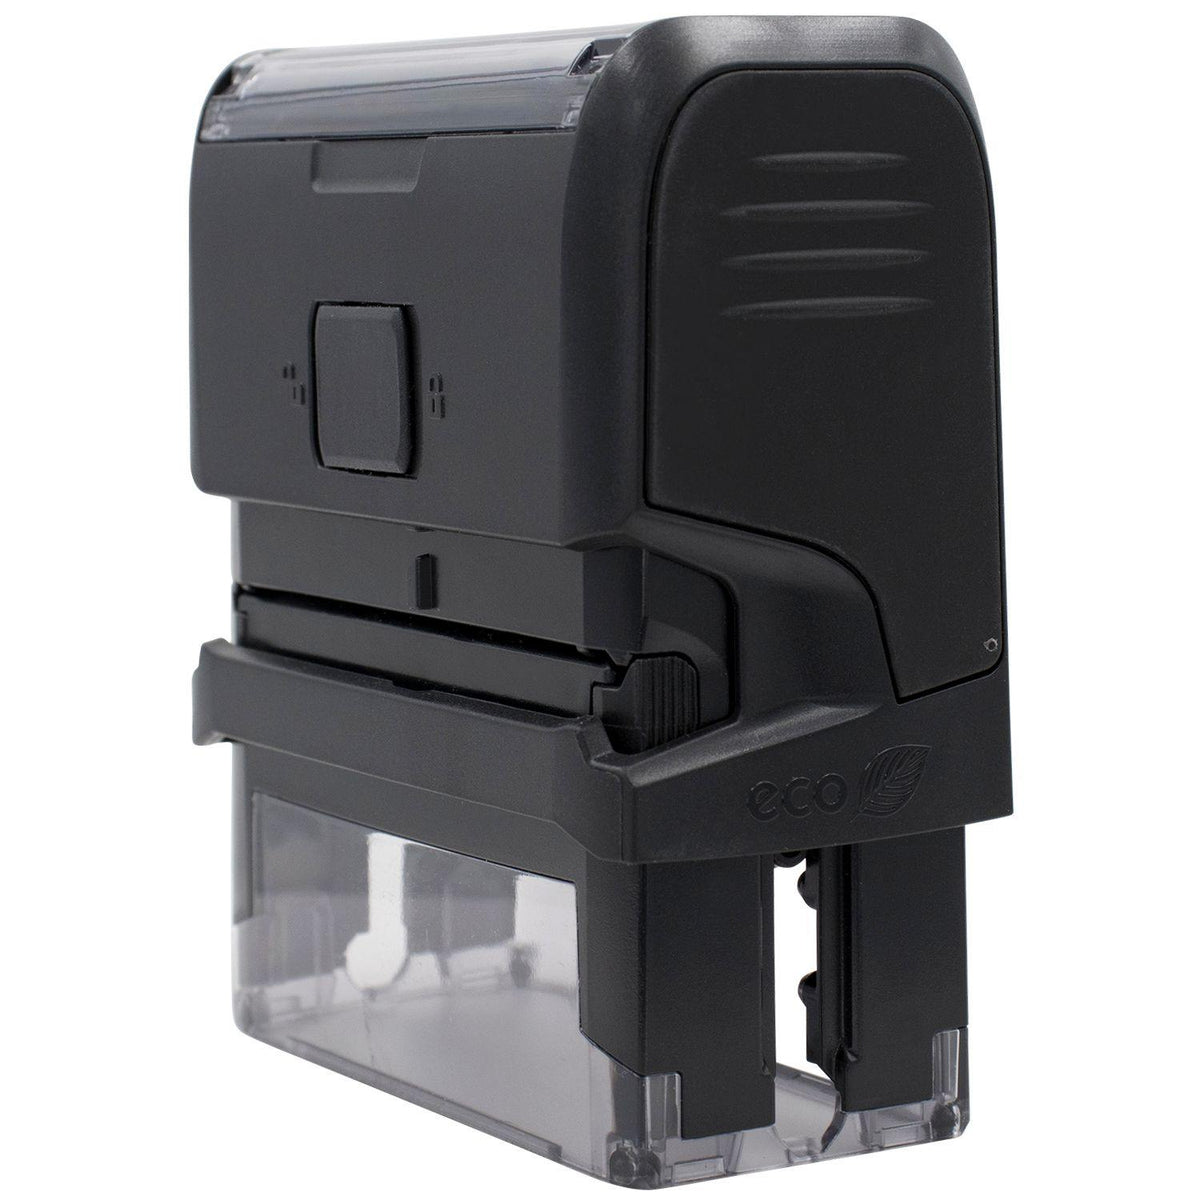 Self-Inking Immunocompromised Stamp - Engineer Seal Stamps - Brand_Trodat, Impression Size_Small, Stamp Type_Self-Inking Stamp, Type of Use_Medical Office